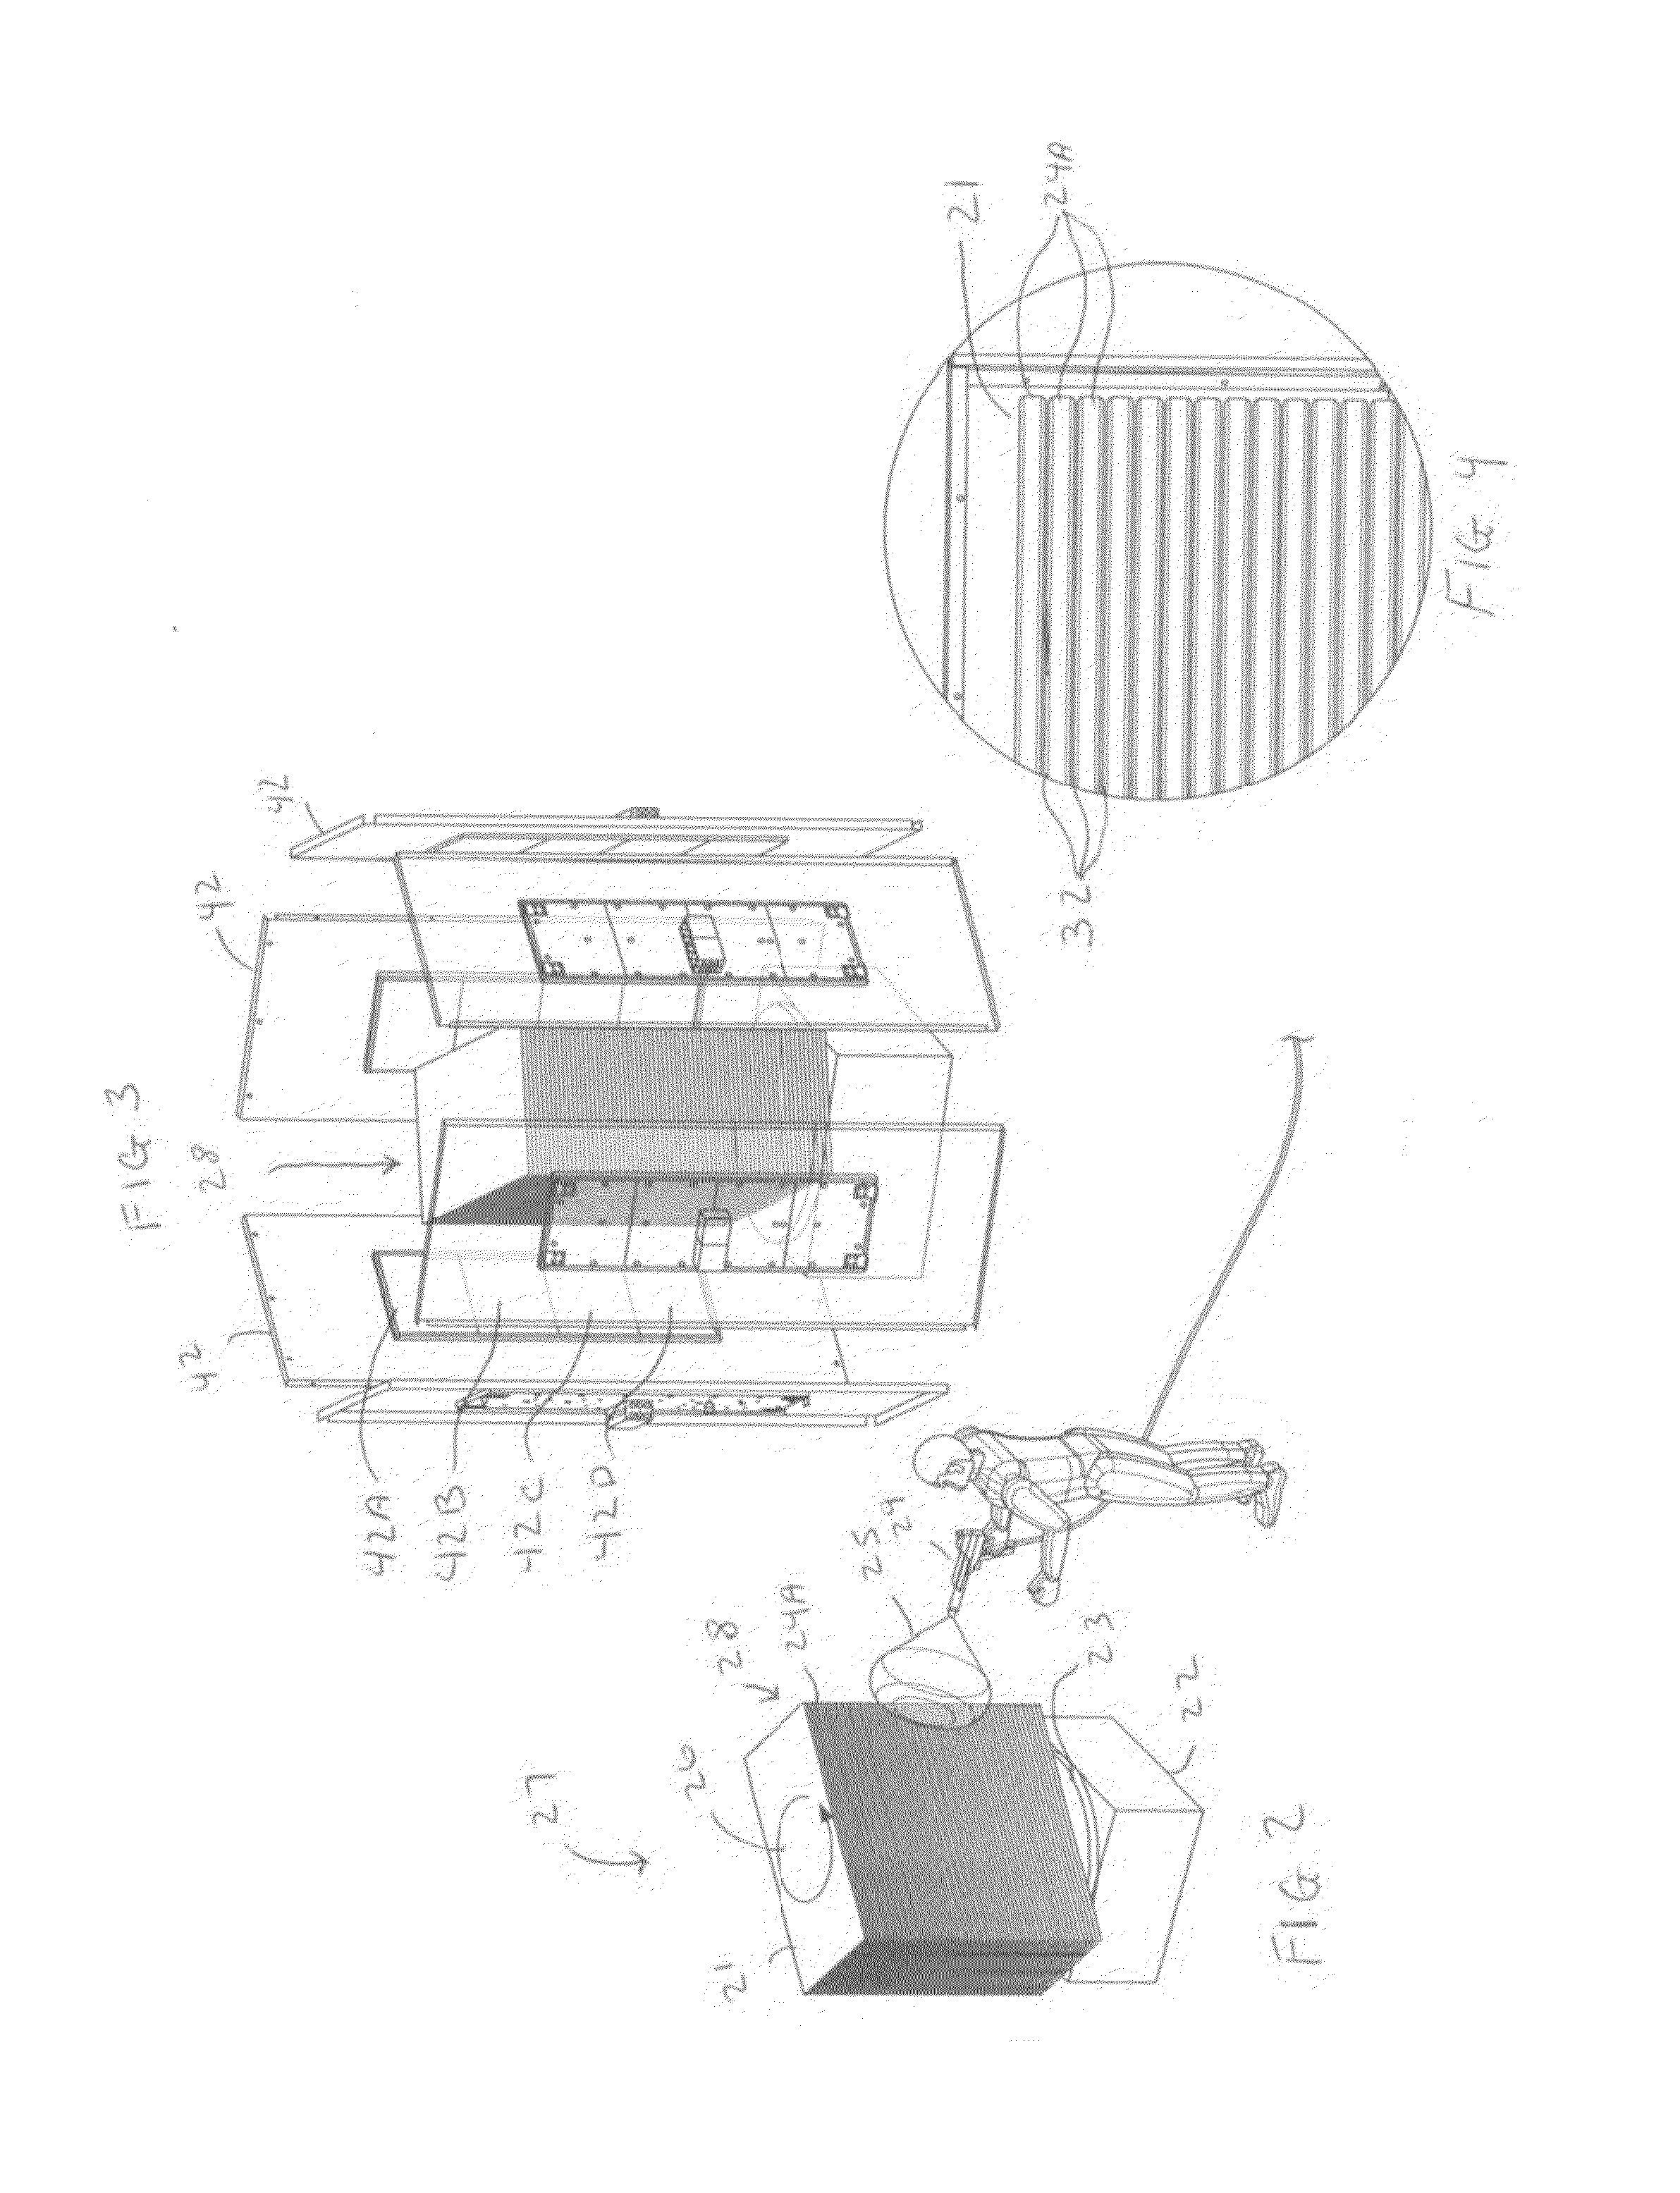 System and Methods for Edge Sealing Medium Density Fiberboard (MDF) and Other Engineered Wood Laminates Using Powder and Liquid Coatings